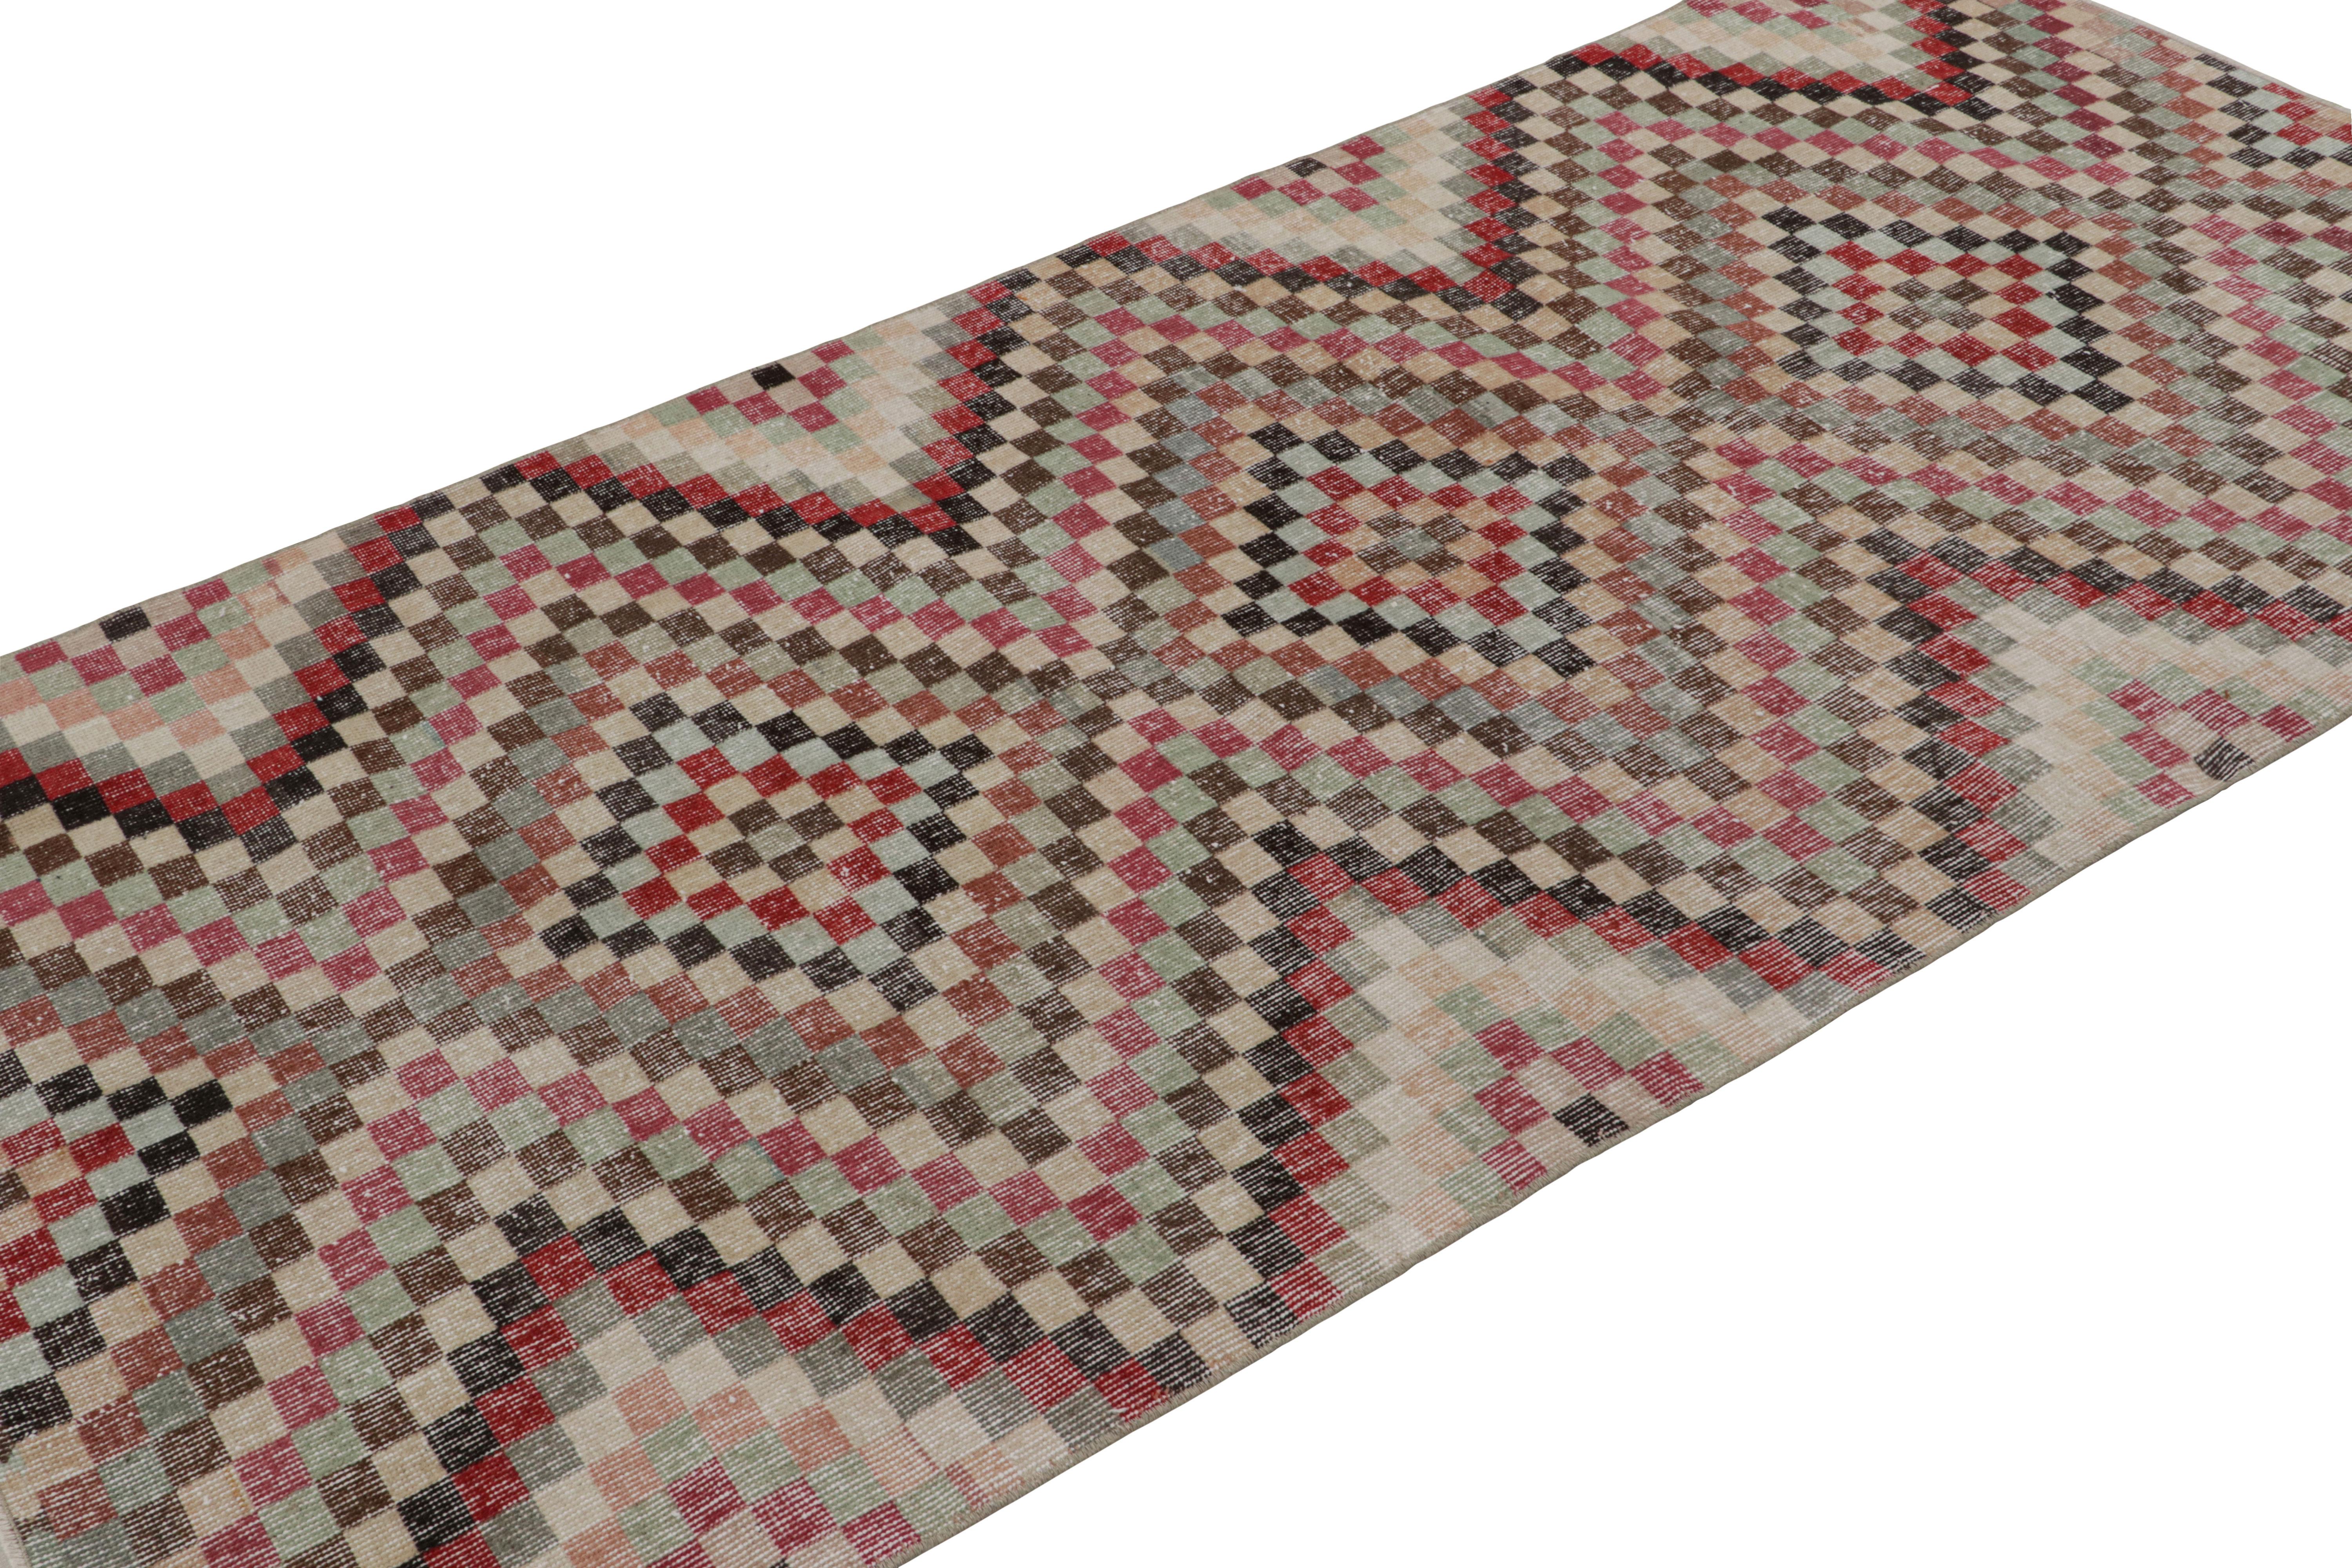 Handknotted in wool, this 4x8 vintage Art deco Zeki Múren rug originates from Turkey, circa 1960-1970 and is latest to join Rug & Kilim’s repertoire of vintage selections. 

On the Design:

Connoisseurs will admire polychromatic colorways with a